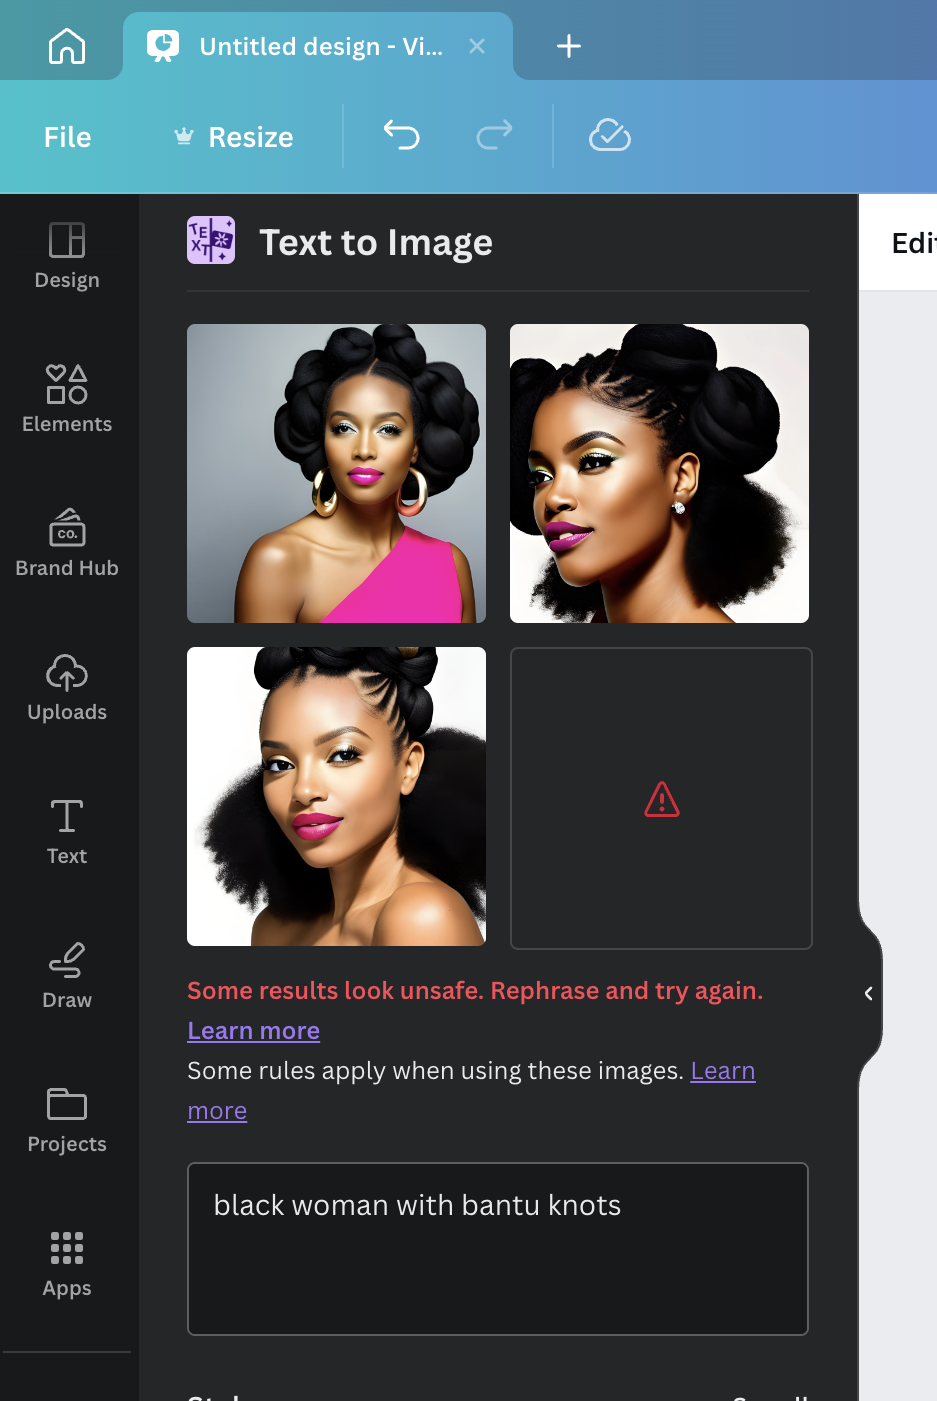 Canva text-to-image too with prompts "black woman with bantu knots". 3 images were generated but the 4th resulted in an error message "Some results look unsafe. Rephrase and try again."